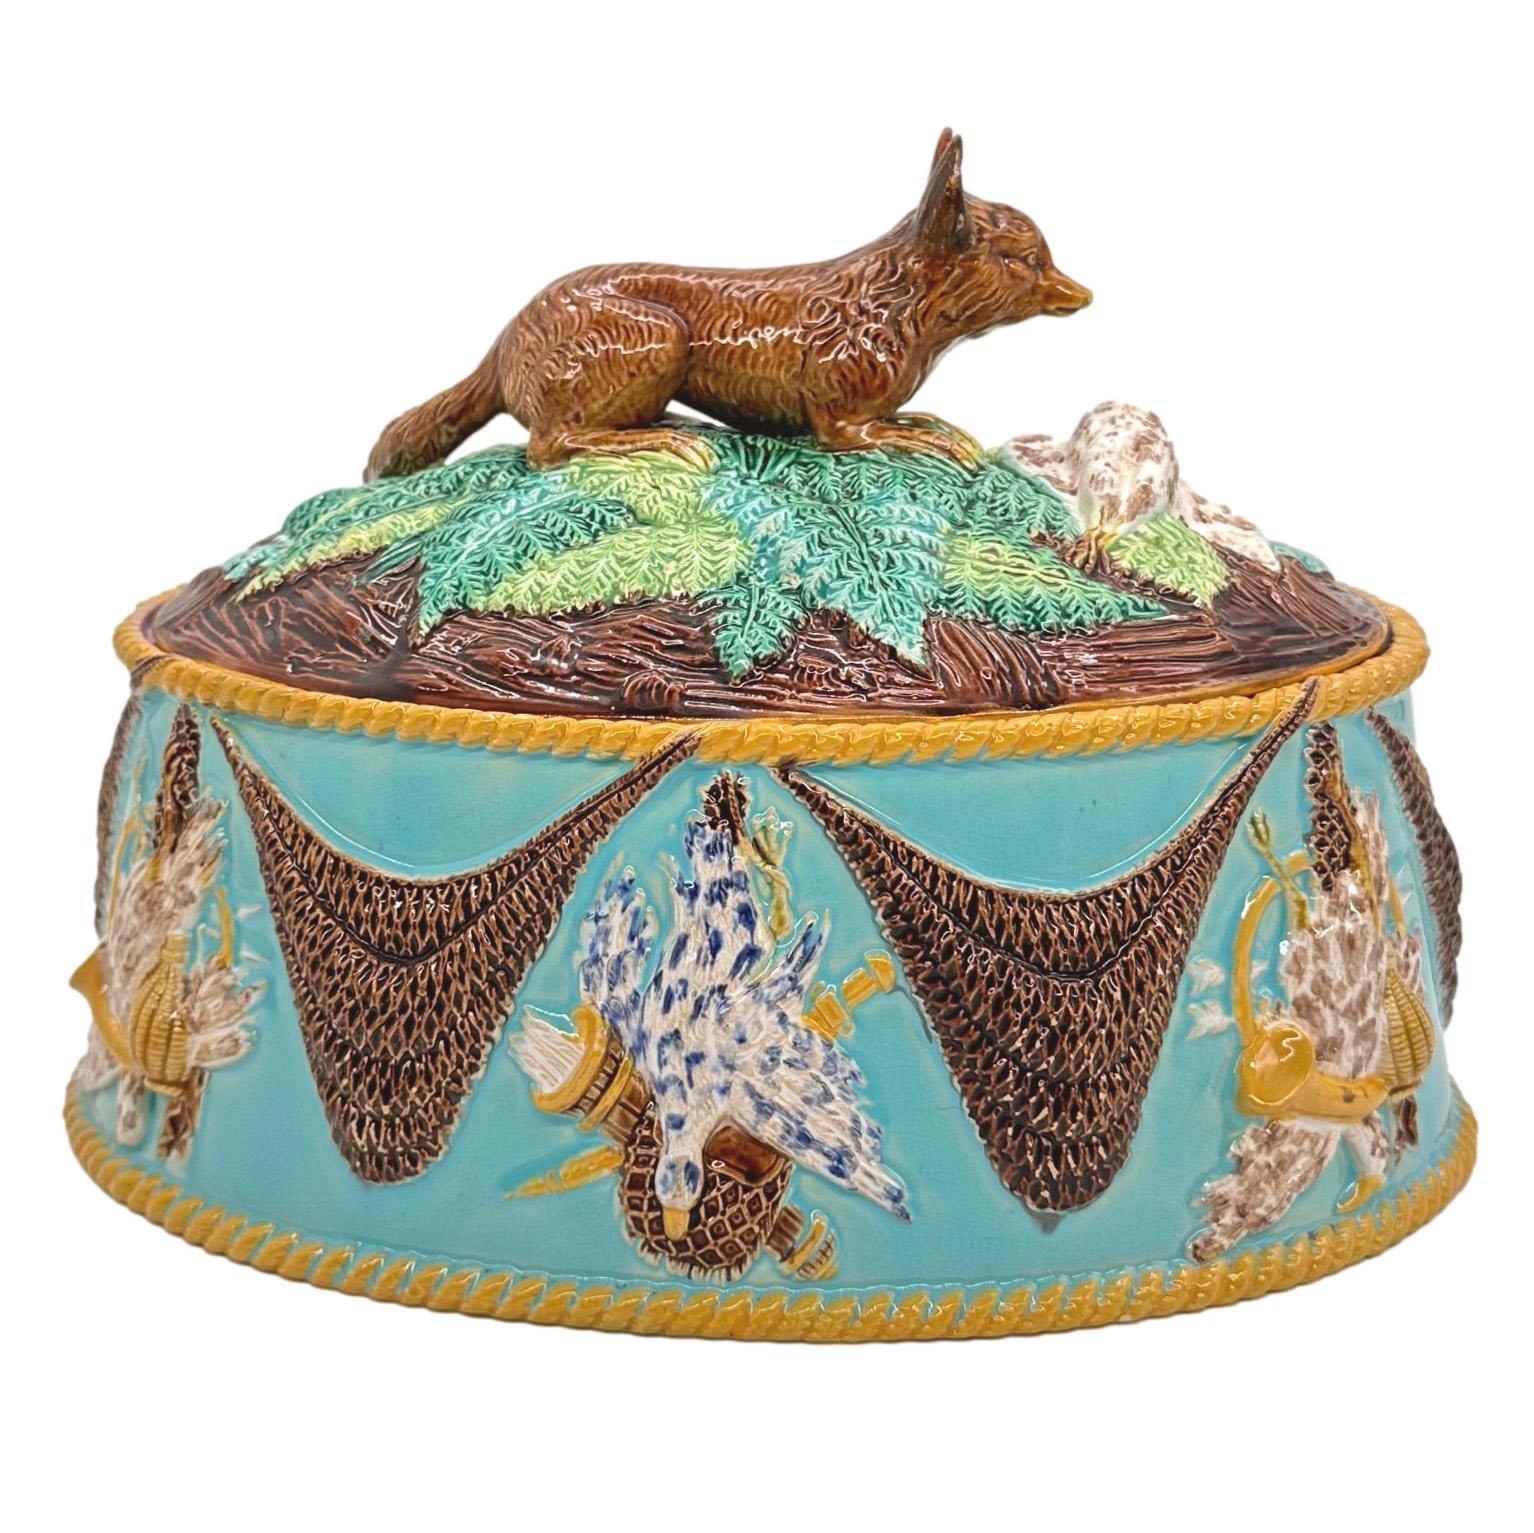 George Jones Majolica Game Tureen with Fox, Turquoise Ground, English, ca. 1870 In Good Condition For Sale In Banner Elk, NC